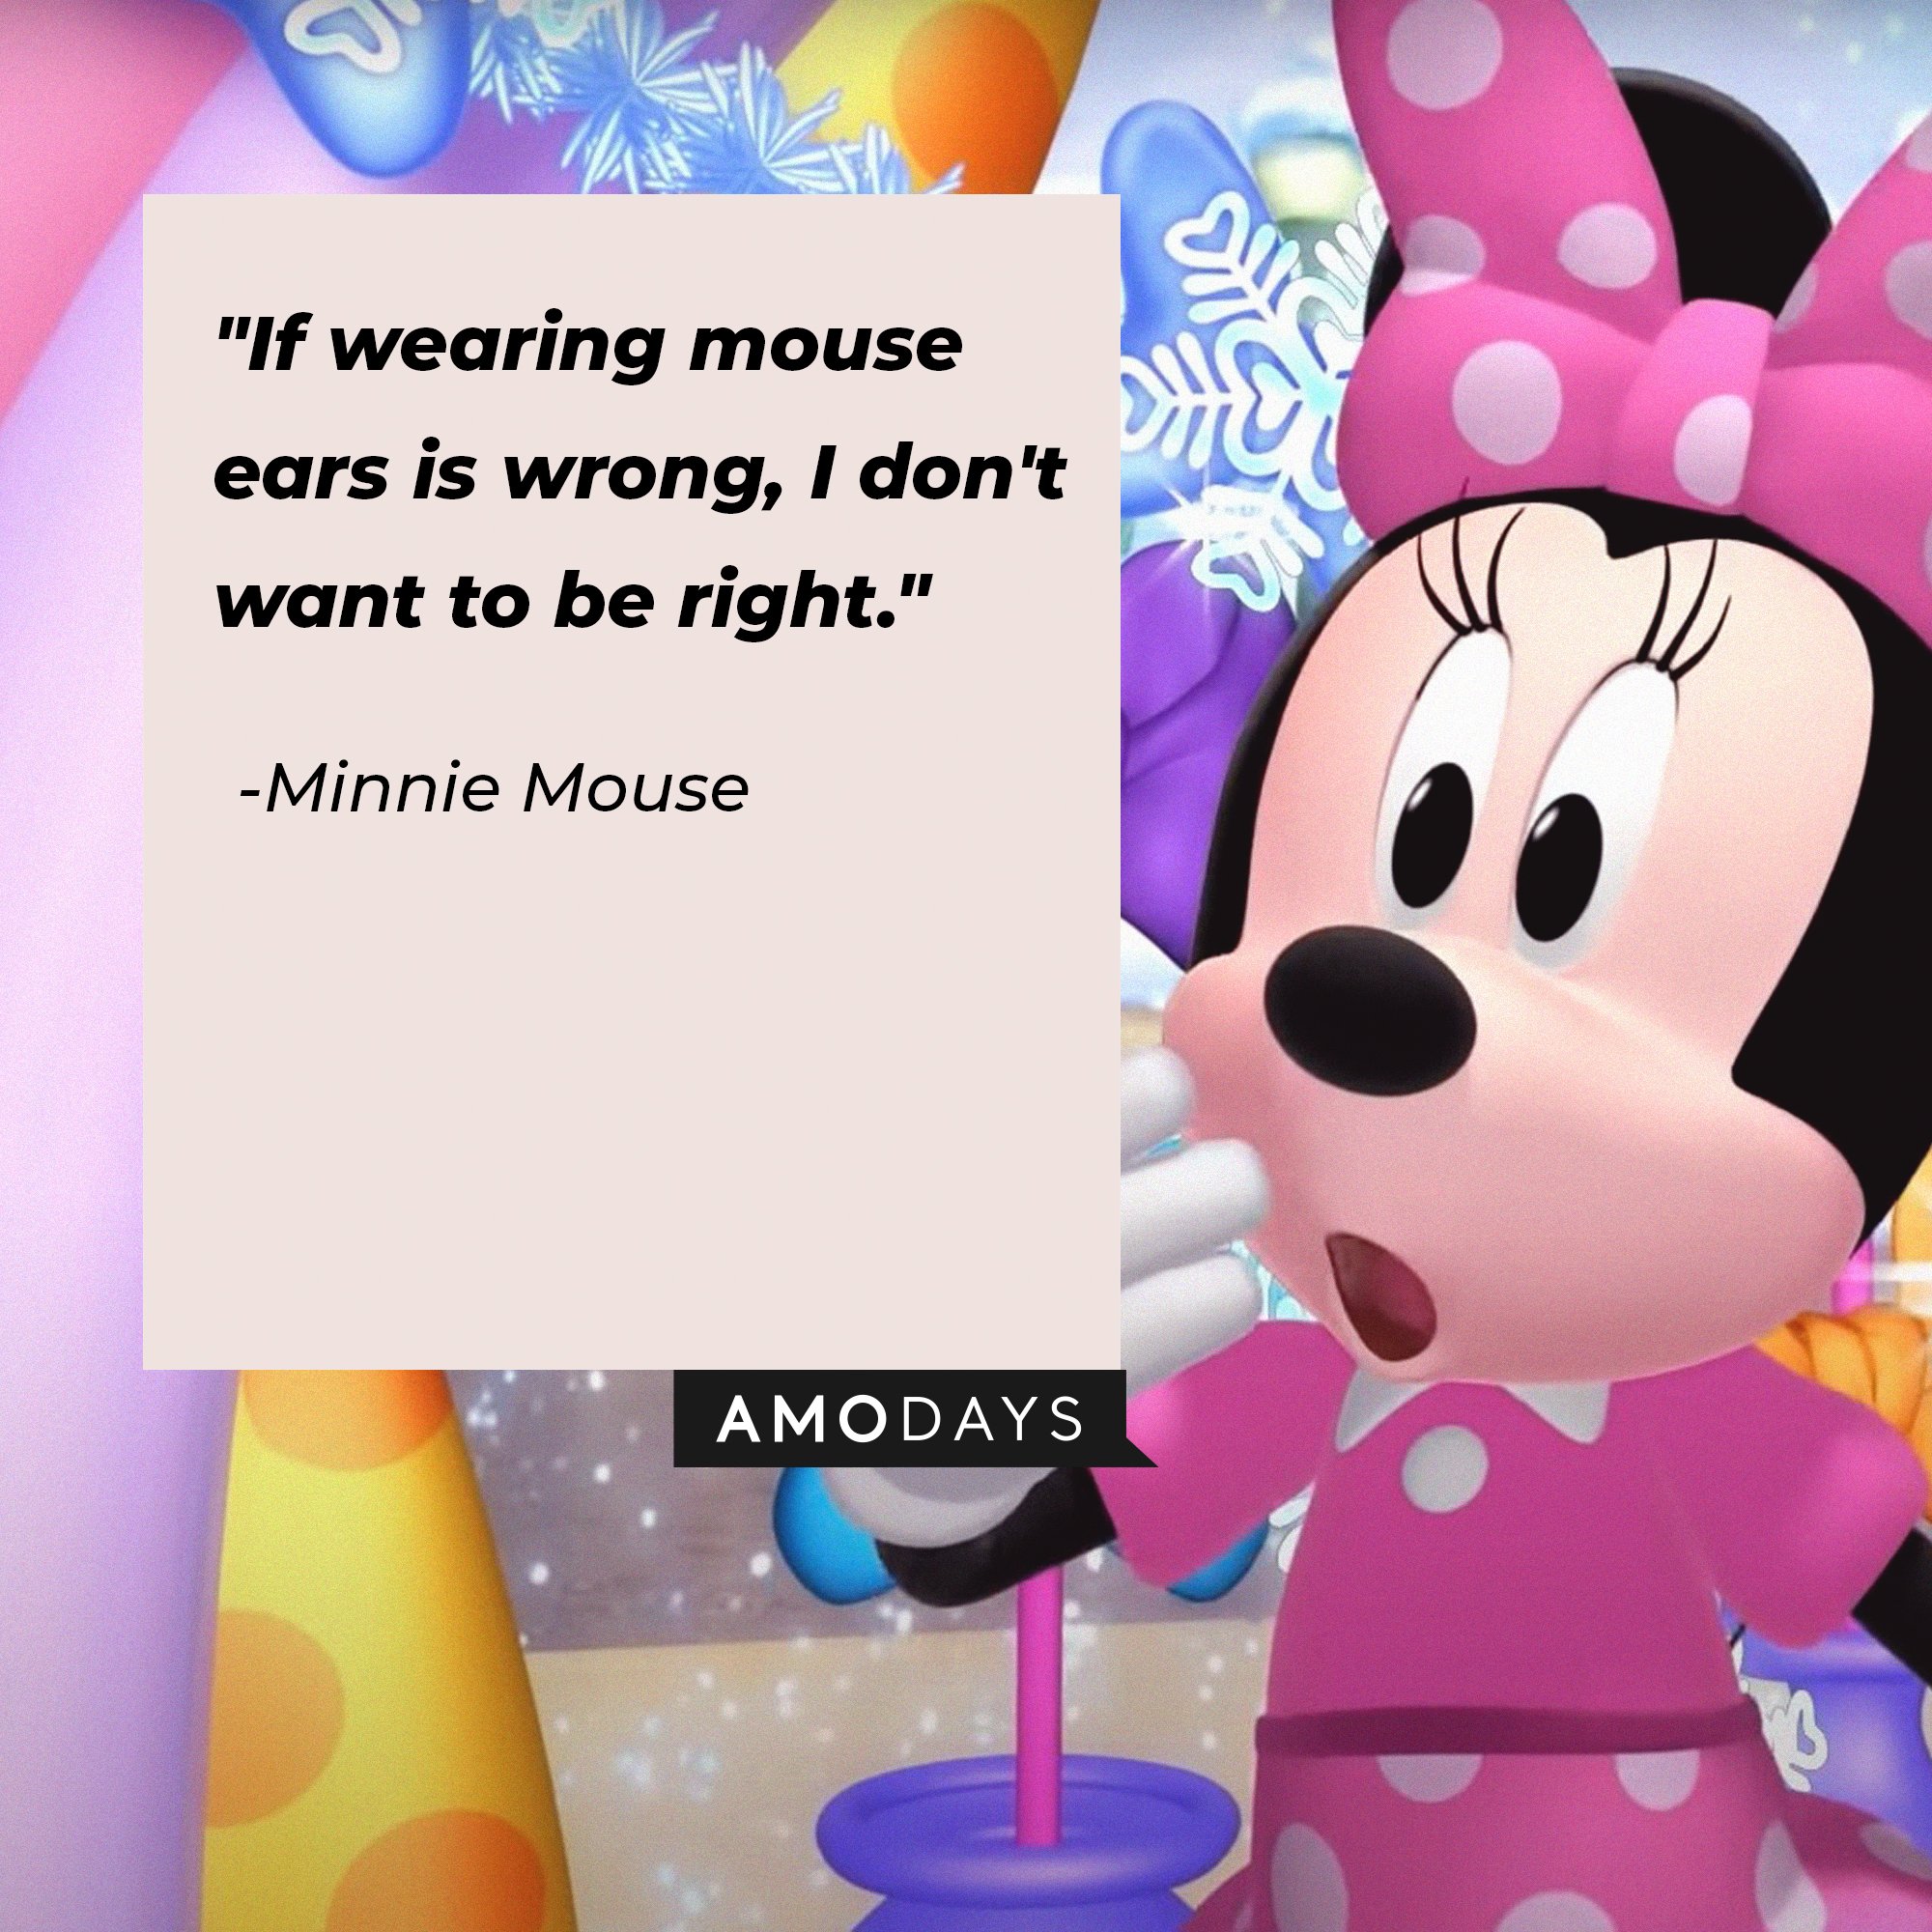 Minnie Mouse’s quote: "If wearing mouse ears is wrong, I don't want to be right." | Image: AmoDays